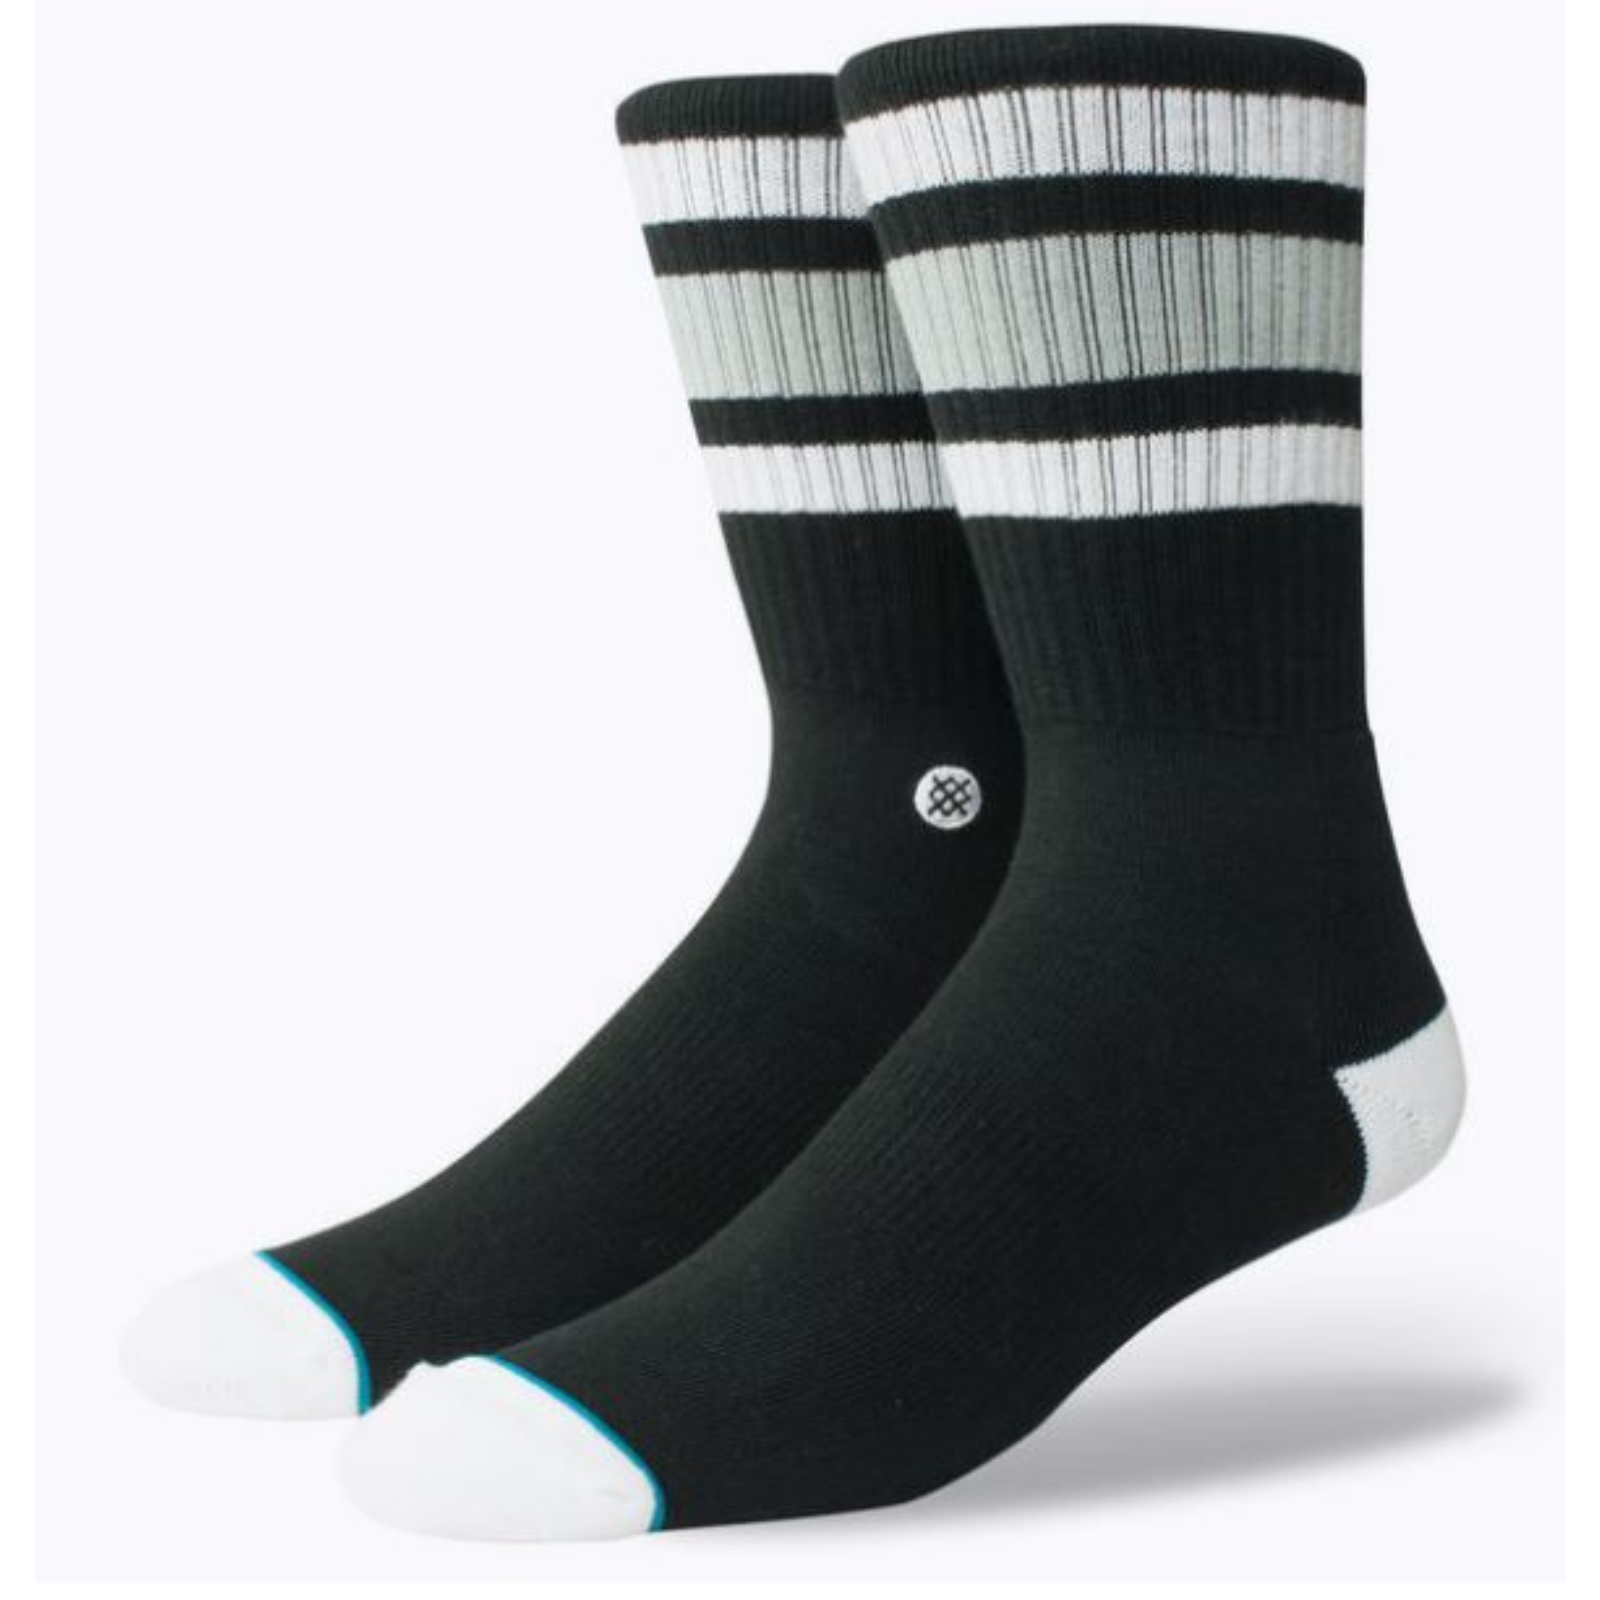 Stance Boyd crew height men's sock featuring black sock with white toe and heel and gray and white stripes at top. Socks shown on display feet. 